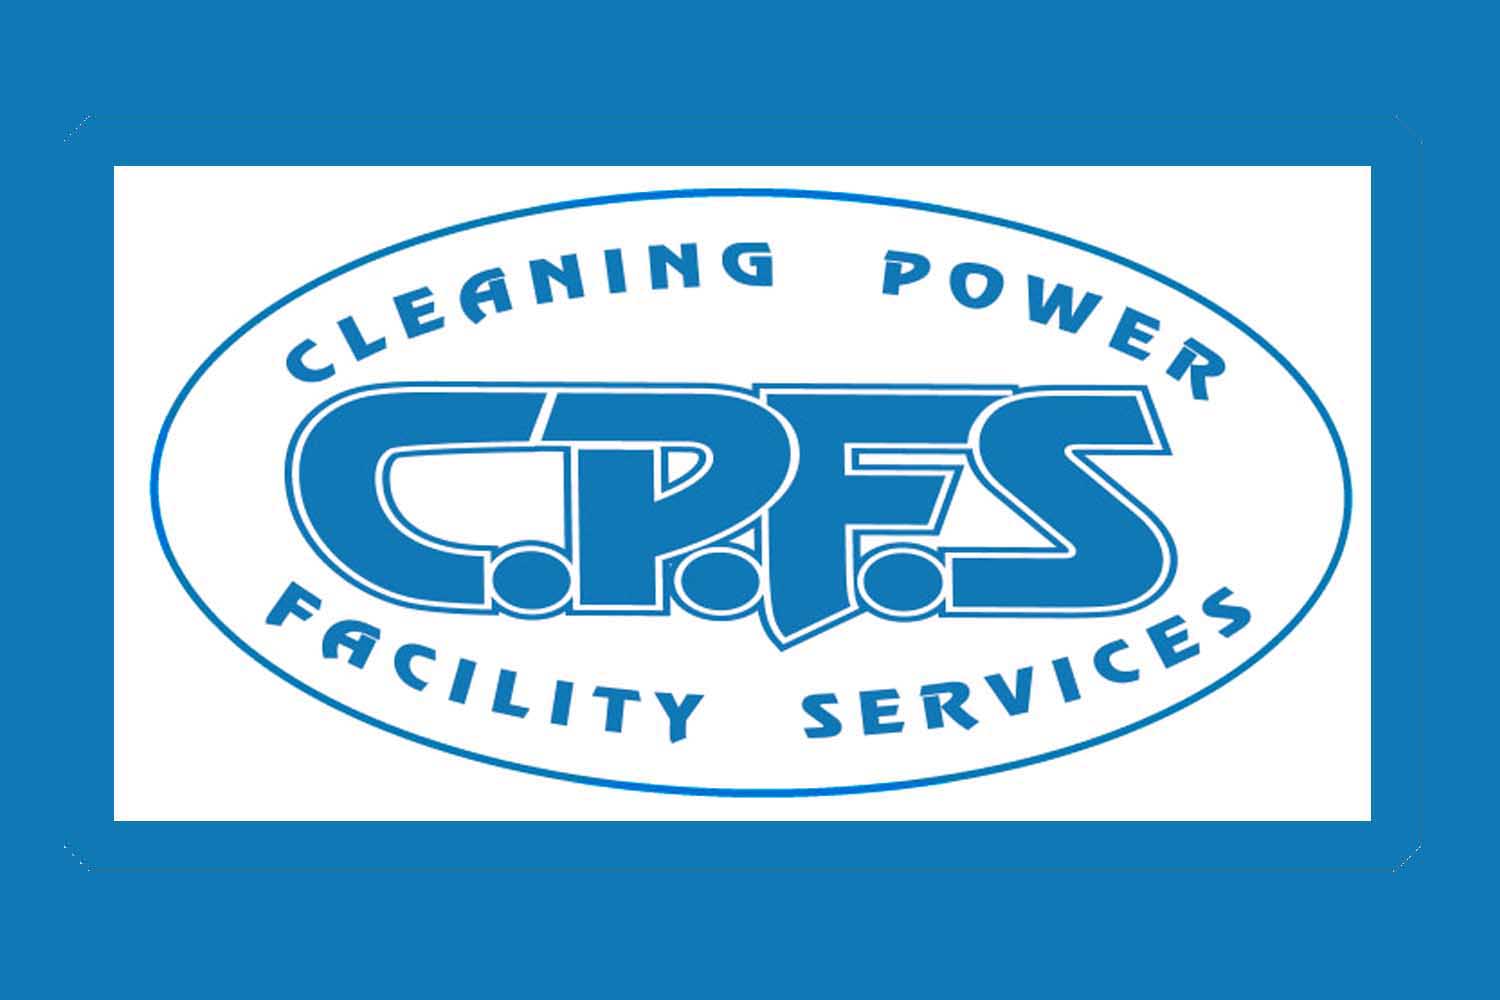 CLEANING POWER C.P.F.S